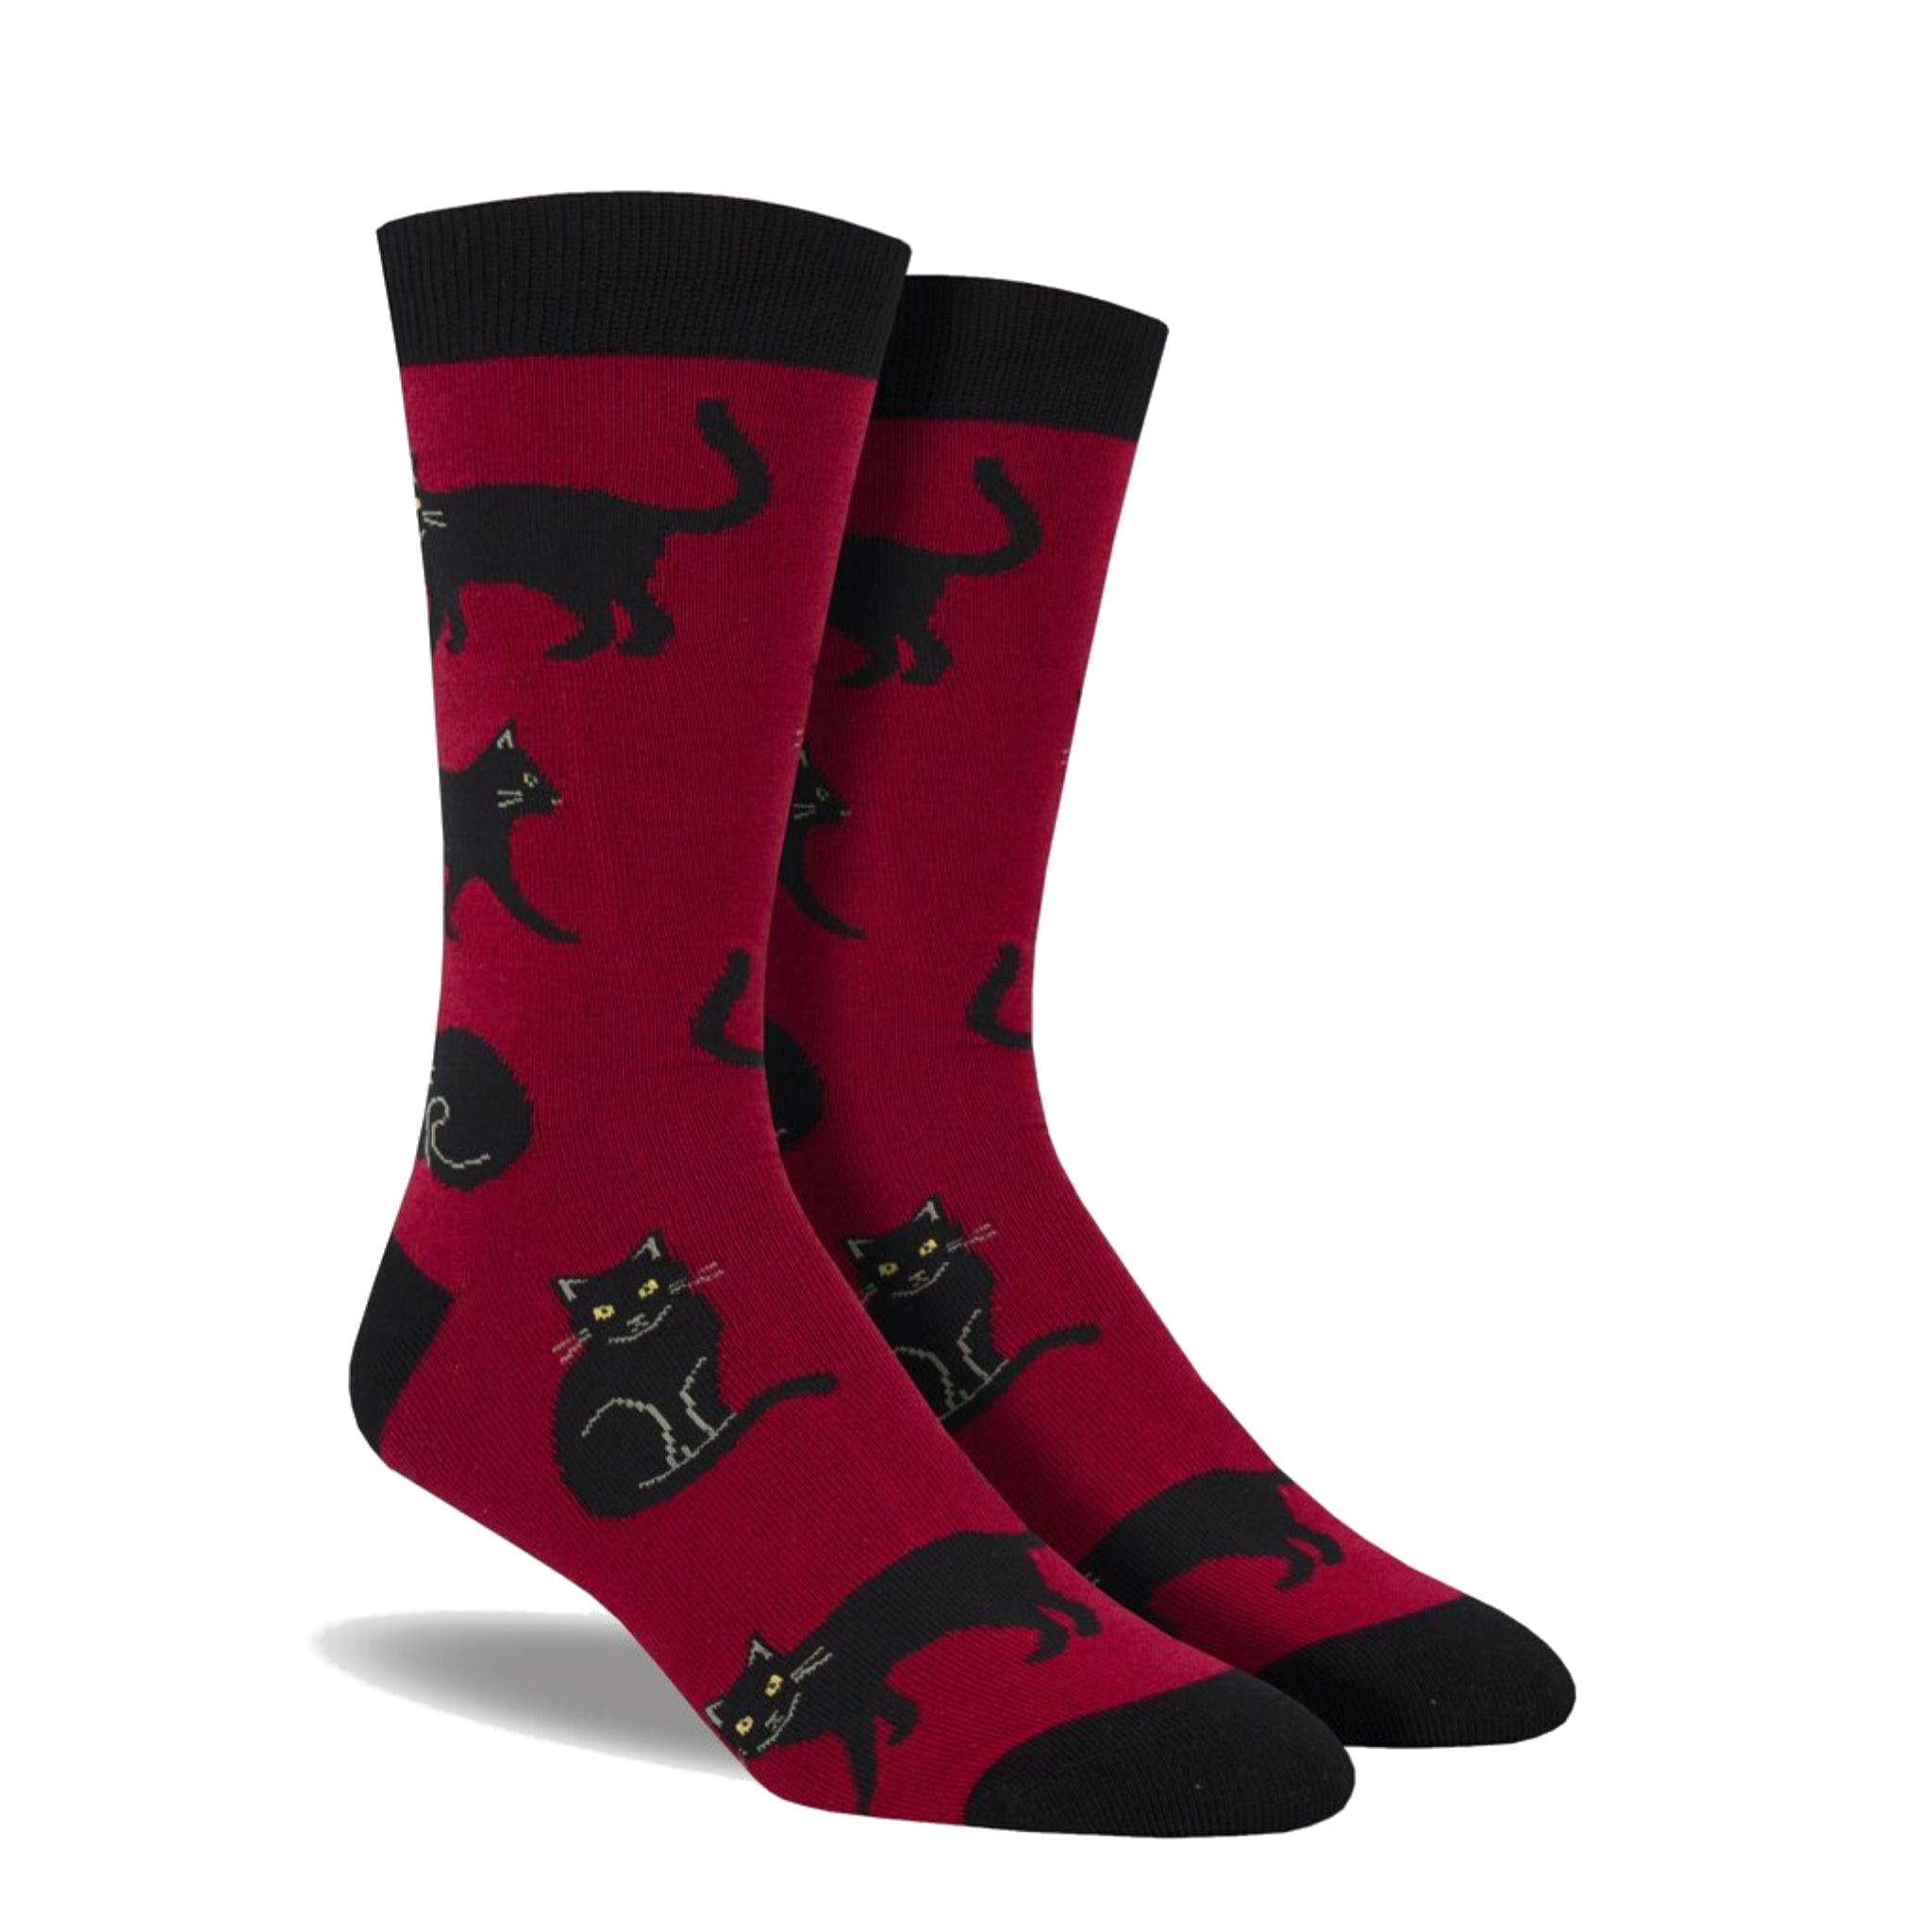 Red socks with black cats